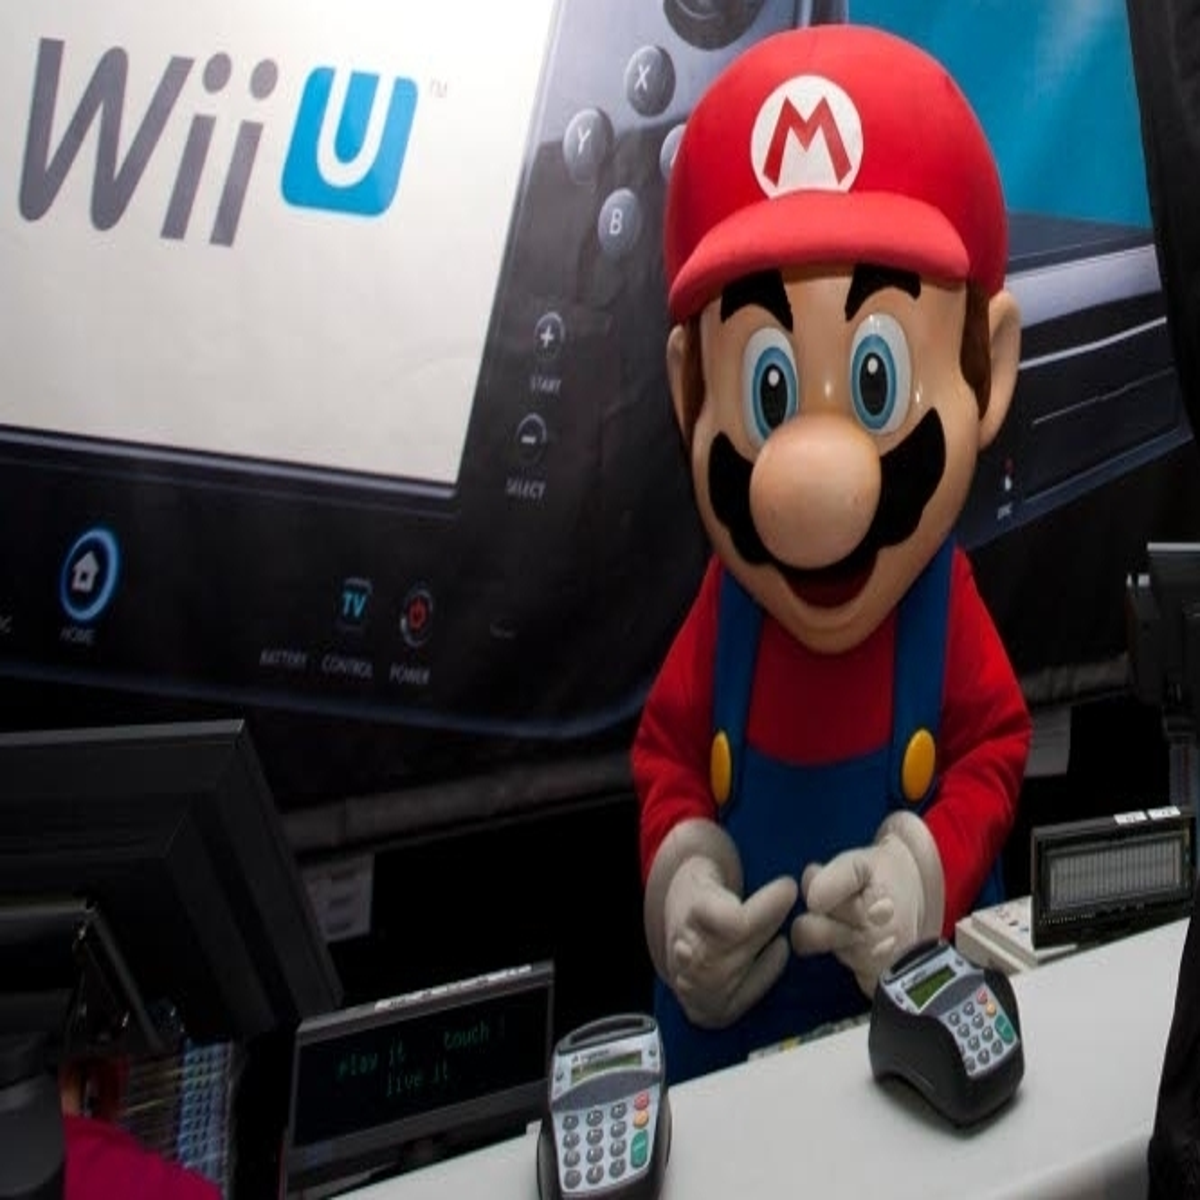 It's over! Nintendo will shut down the servers for Wii U and Nintendo 3DS  forever